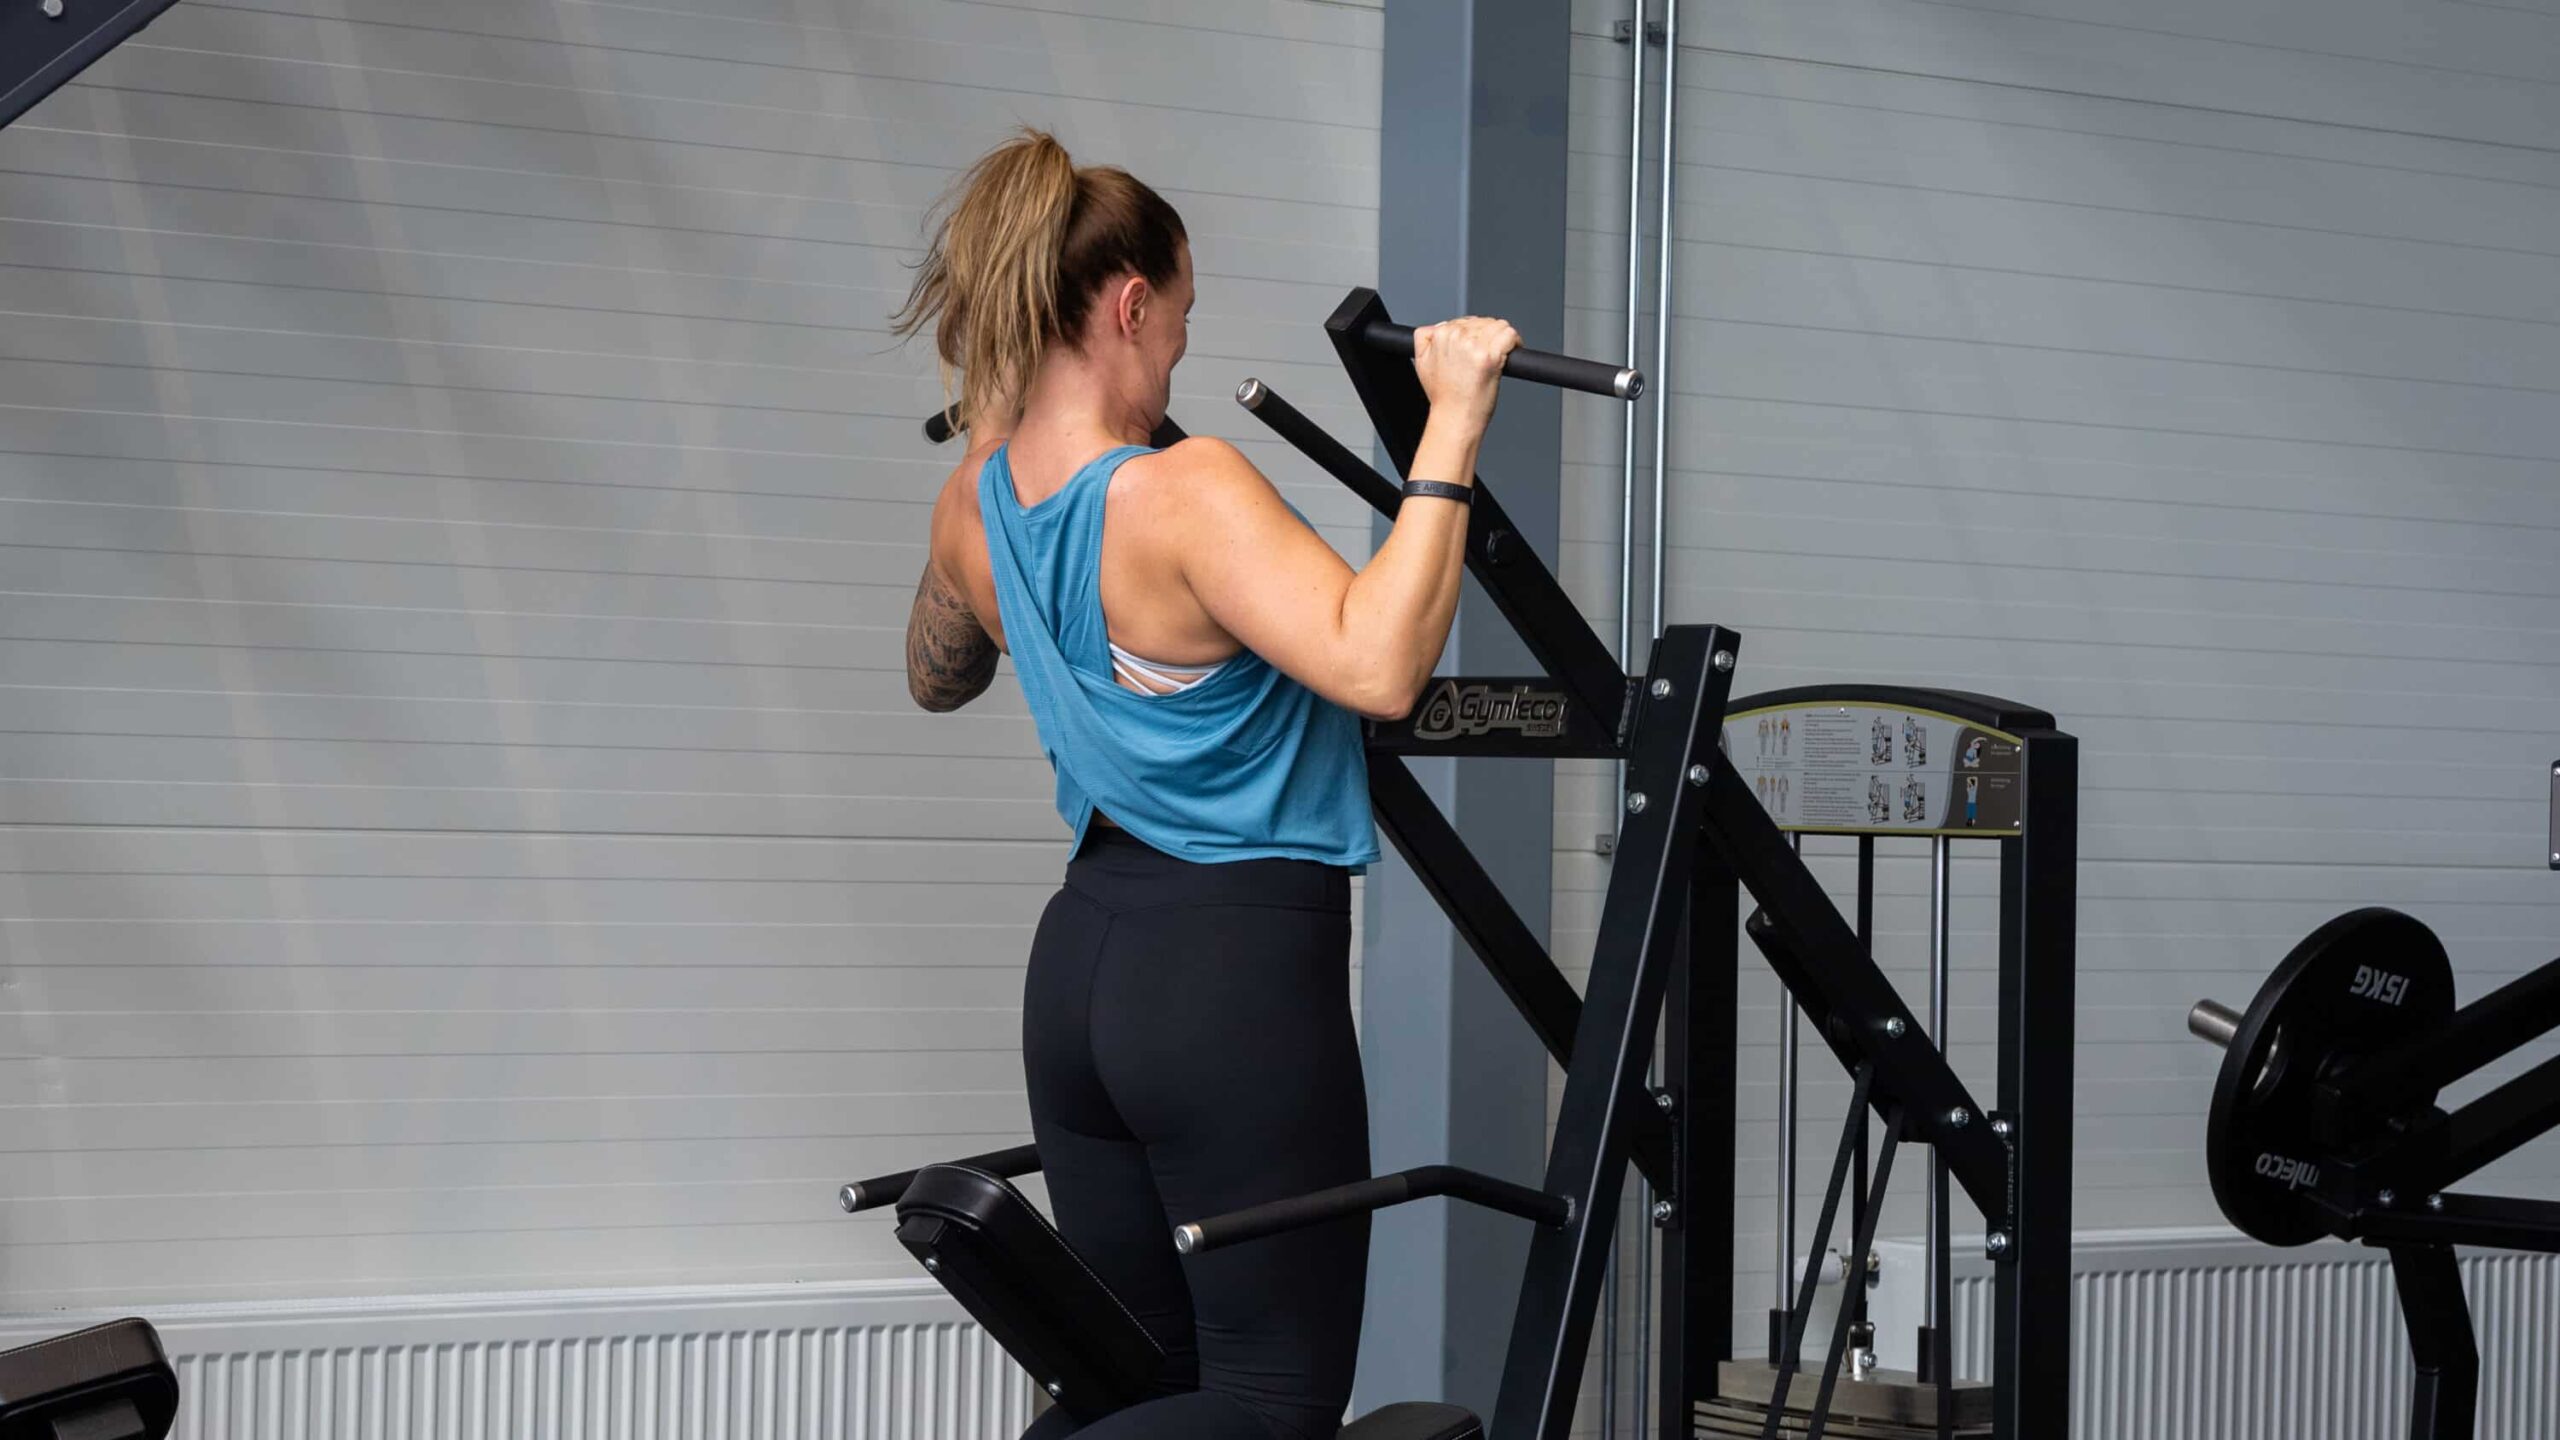 Women working out chins in Gymleco's chins / dips combi gym machine